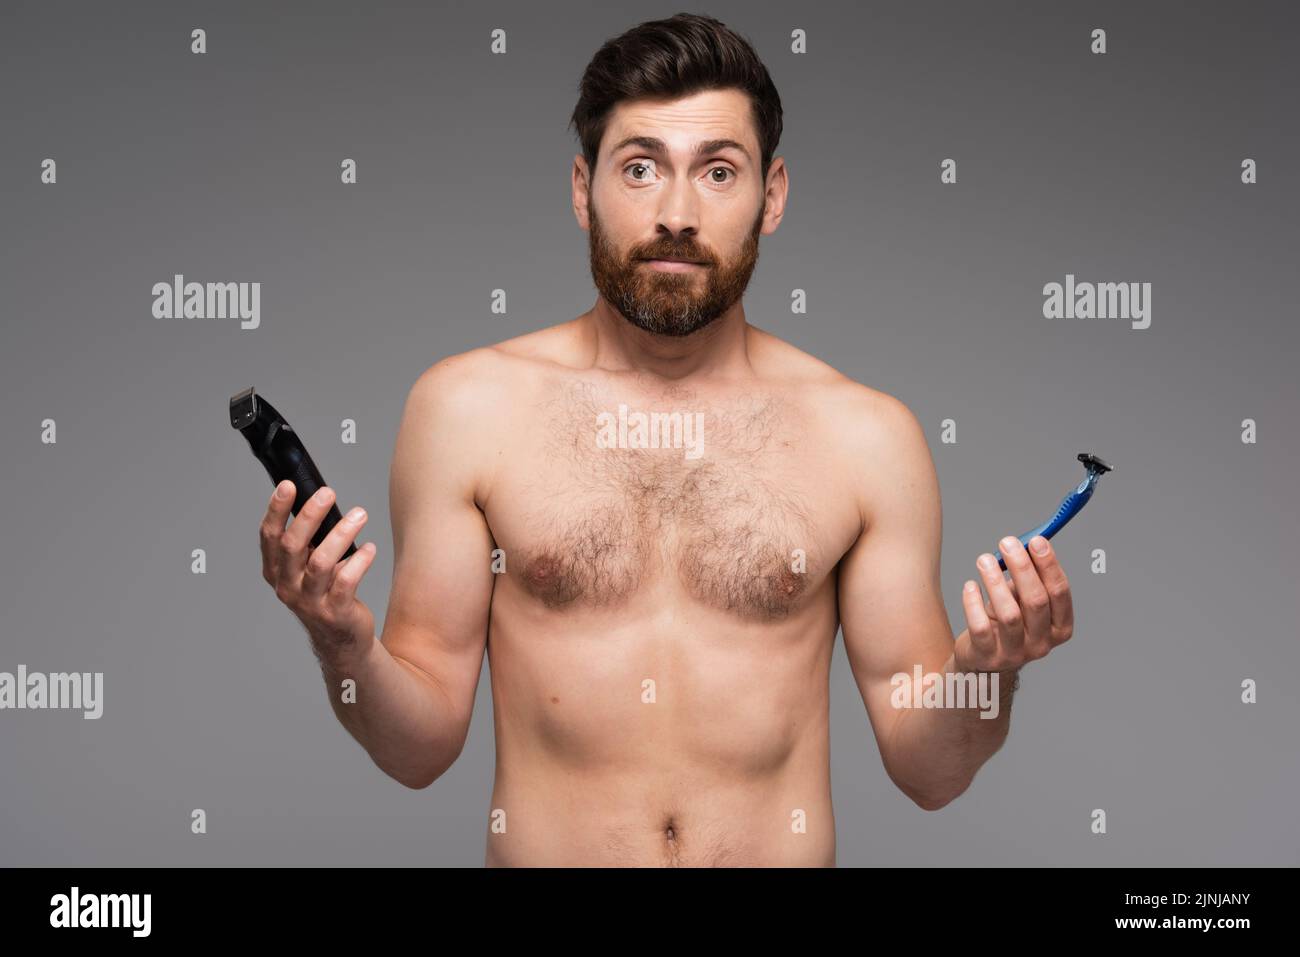 confused and shirtless man with beard holding safety and electric razors isolated on grey,stock image Stock Photo